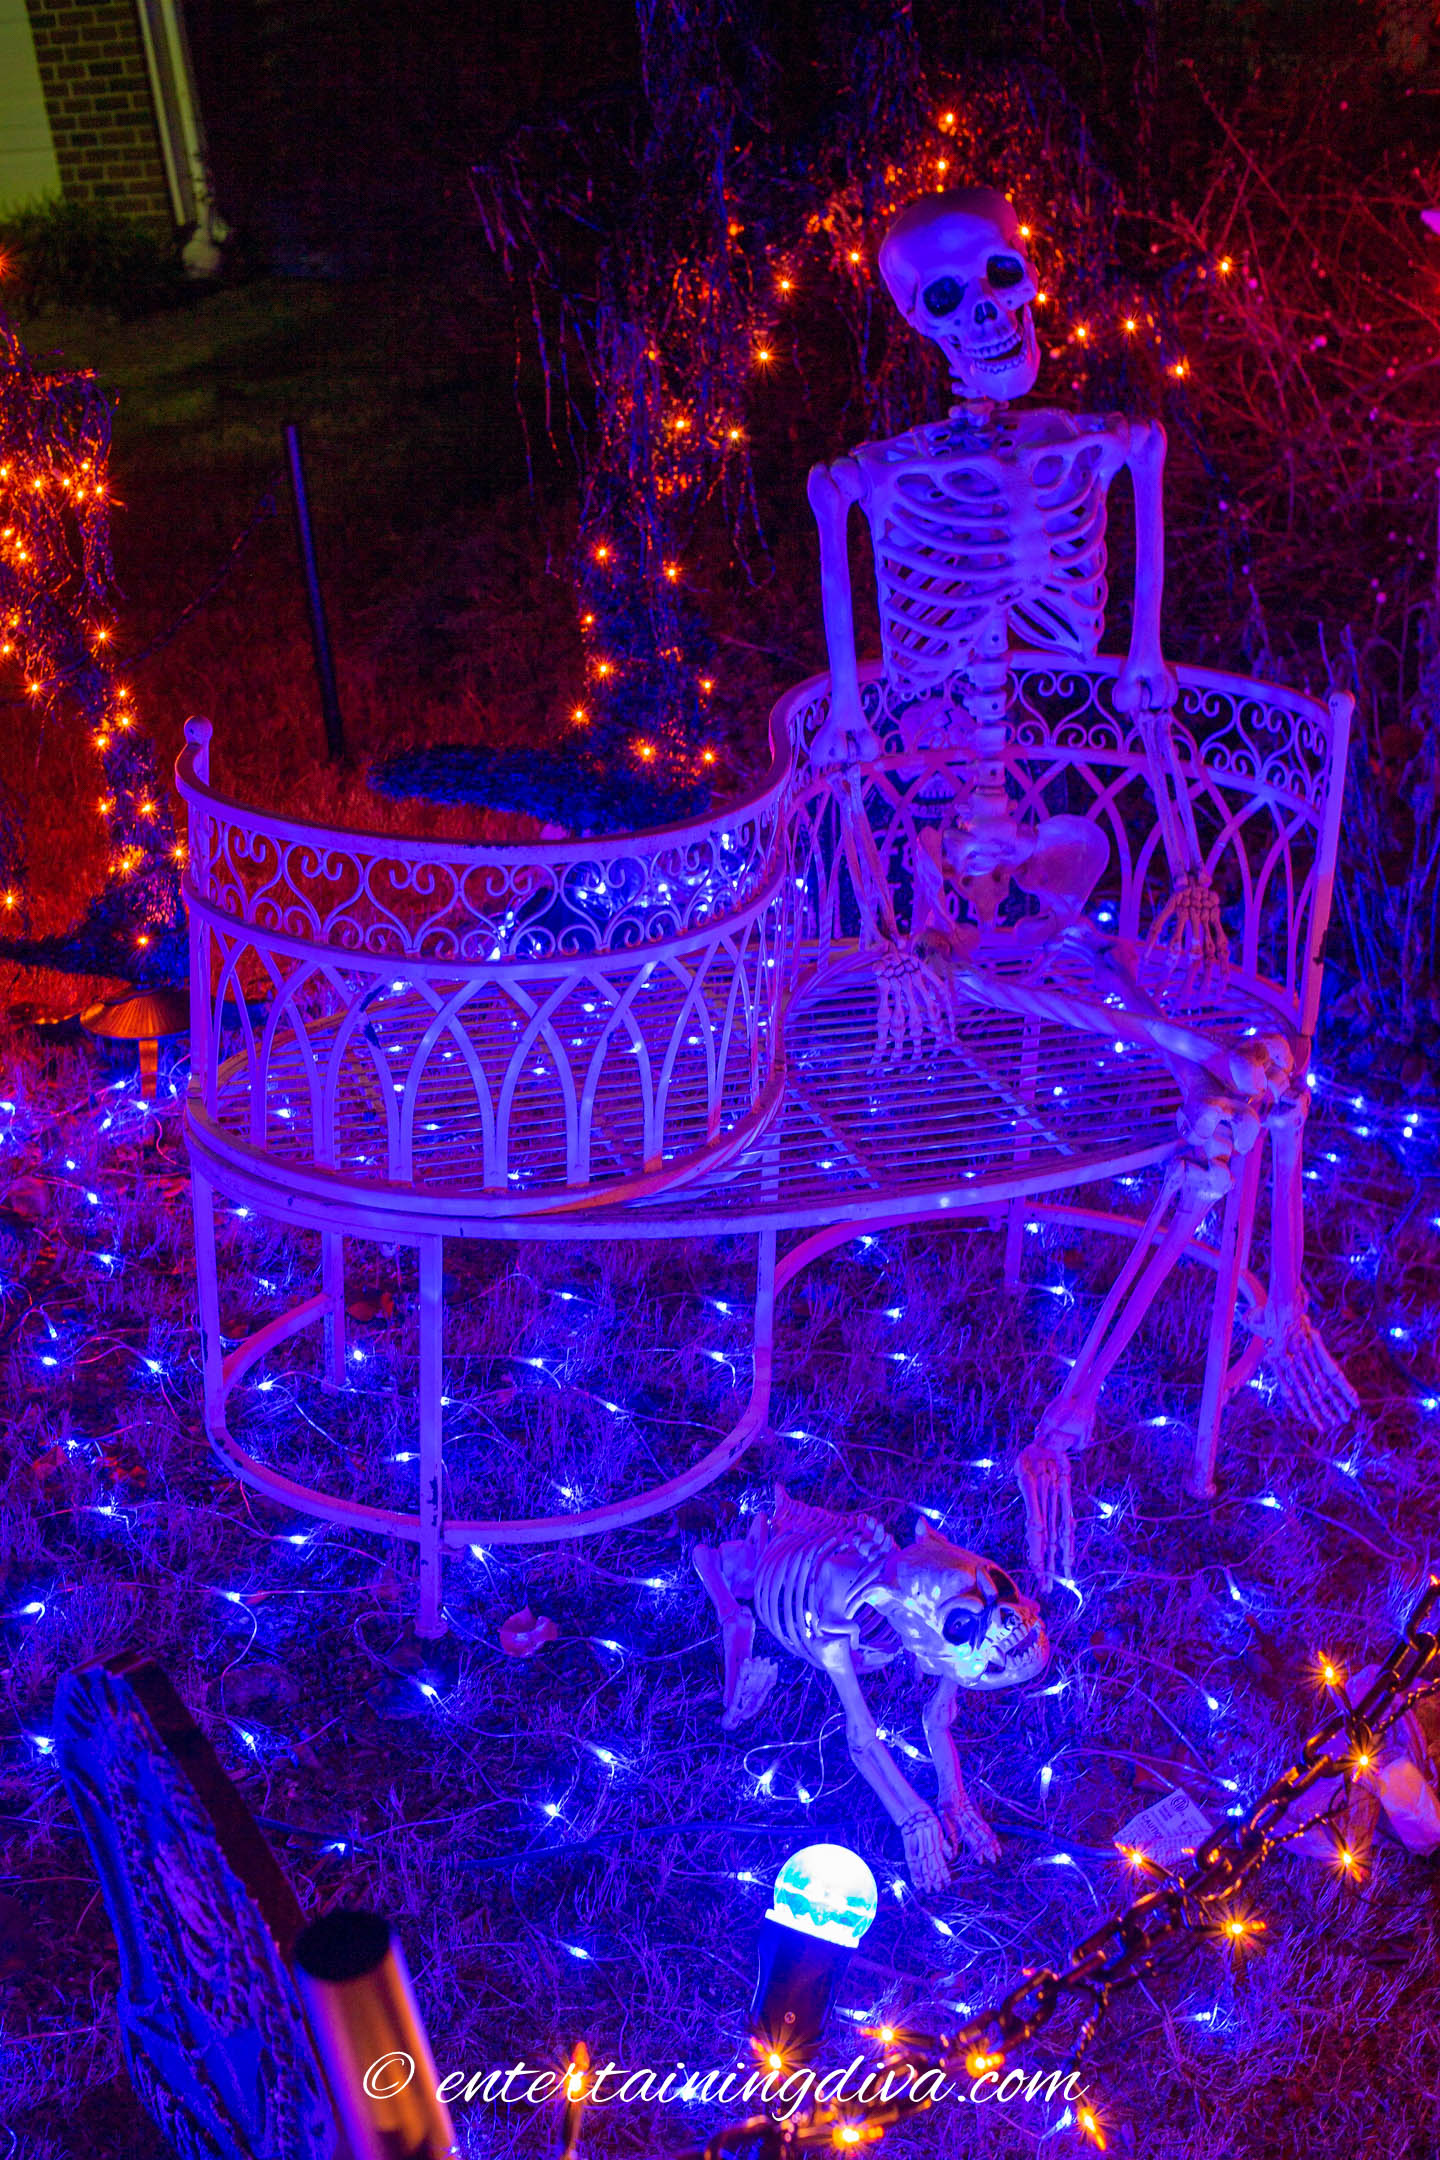 Skeleton on an outdoor bench lit with blue lights.